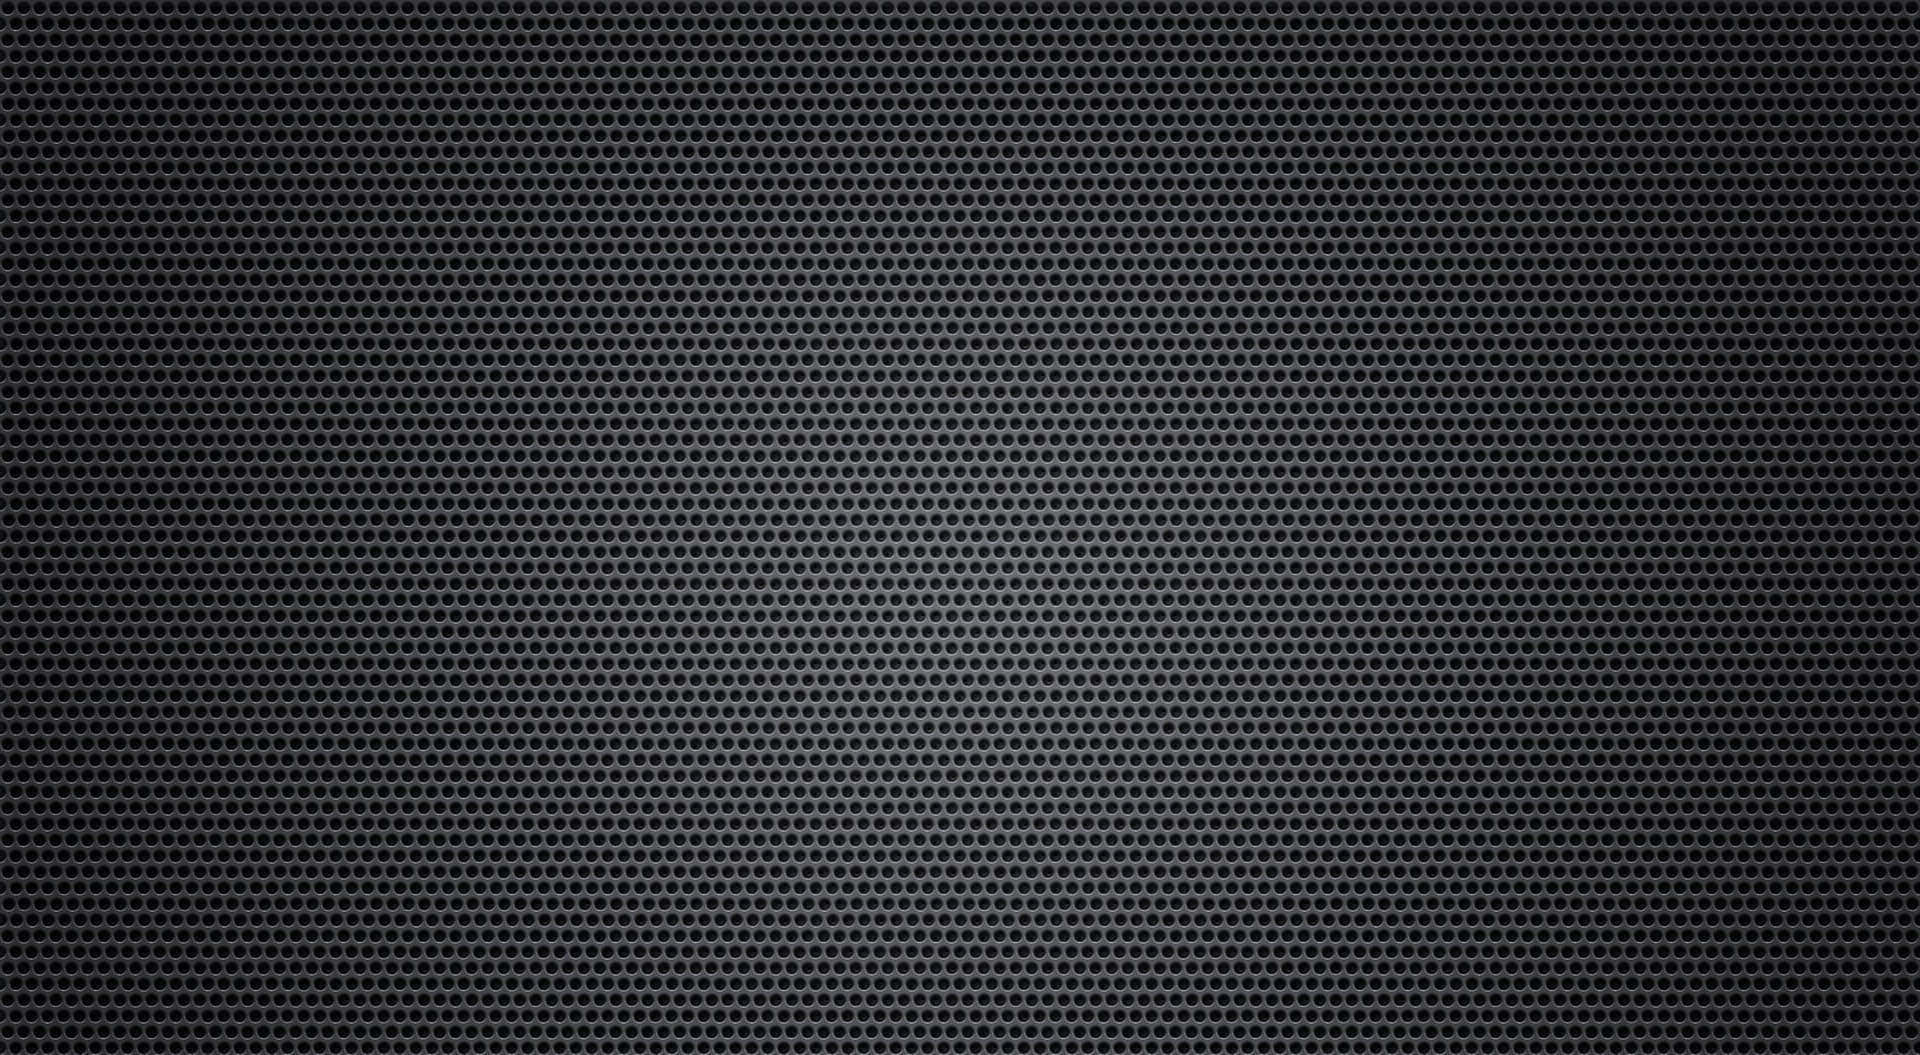 A Black Background With A Grid Pattern